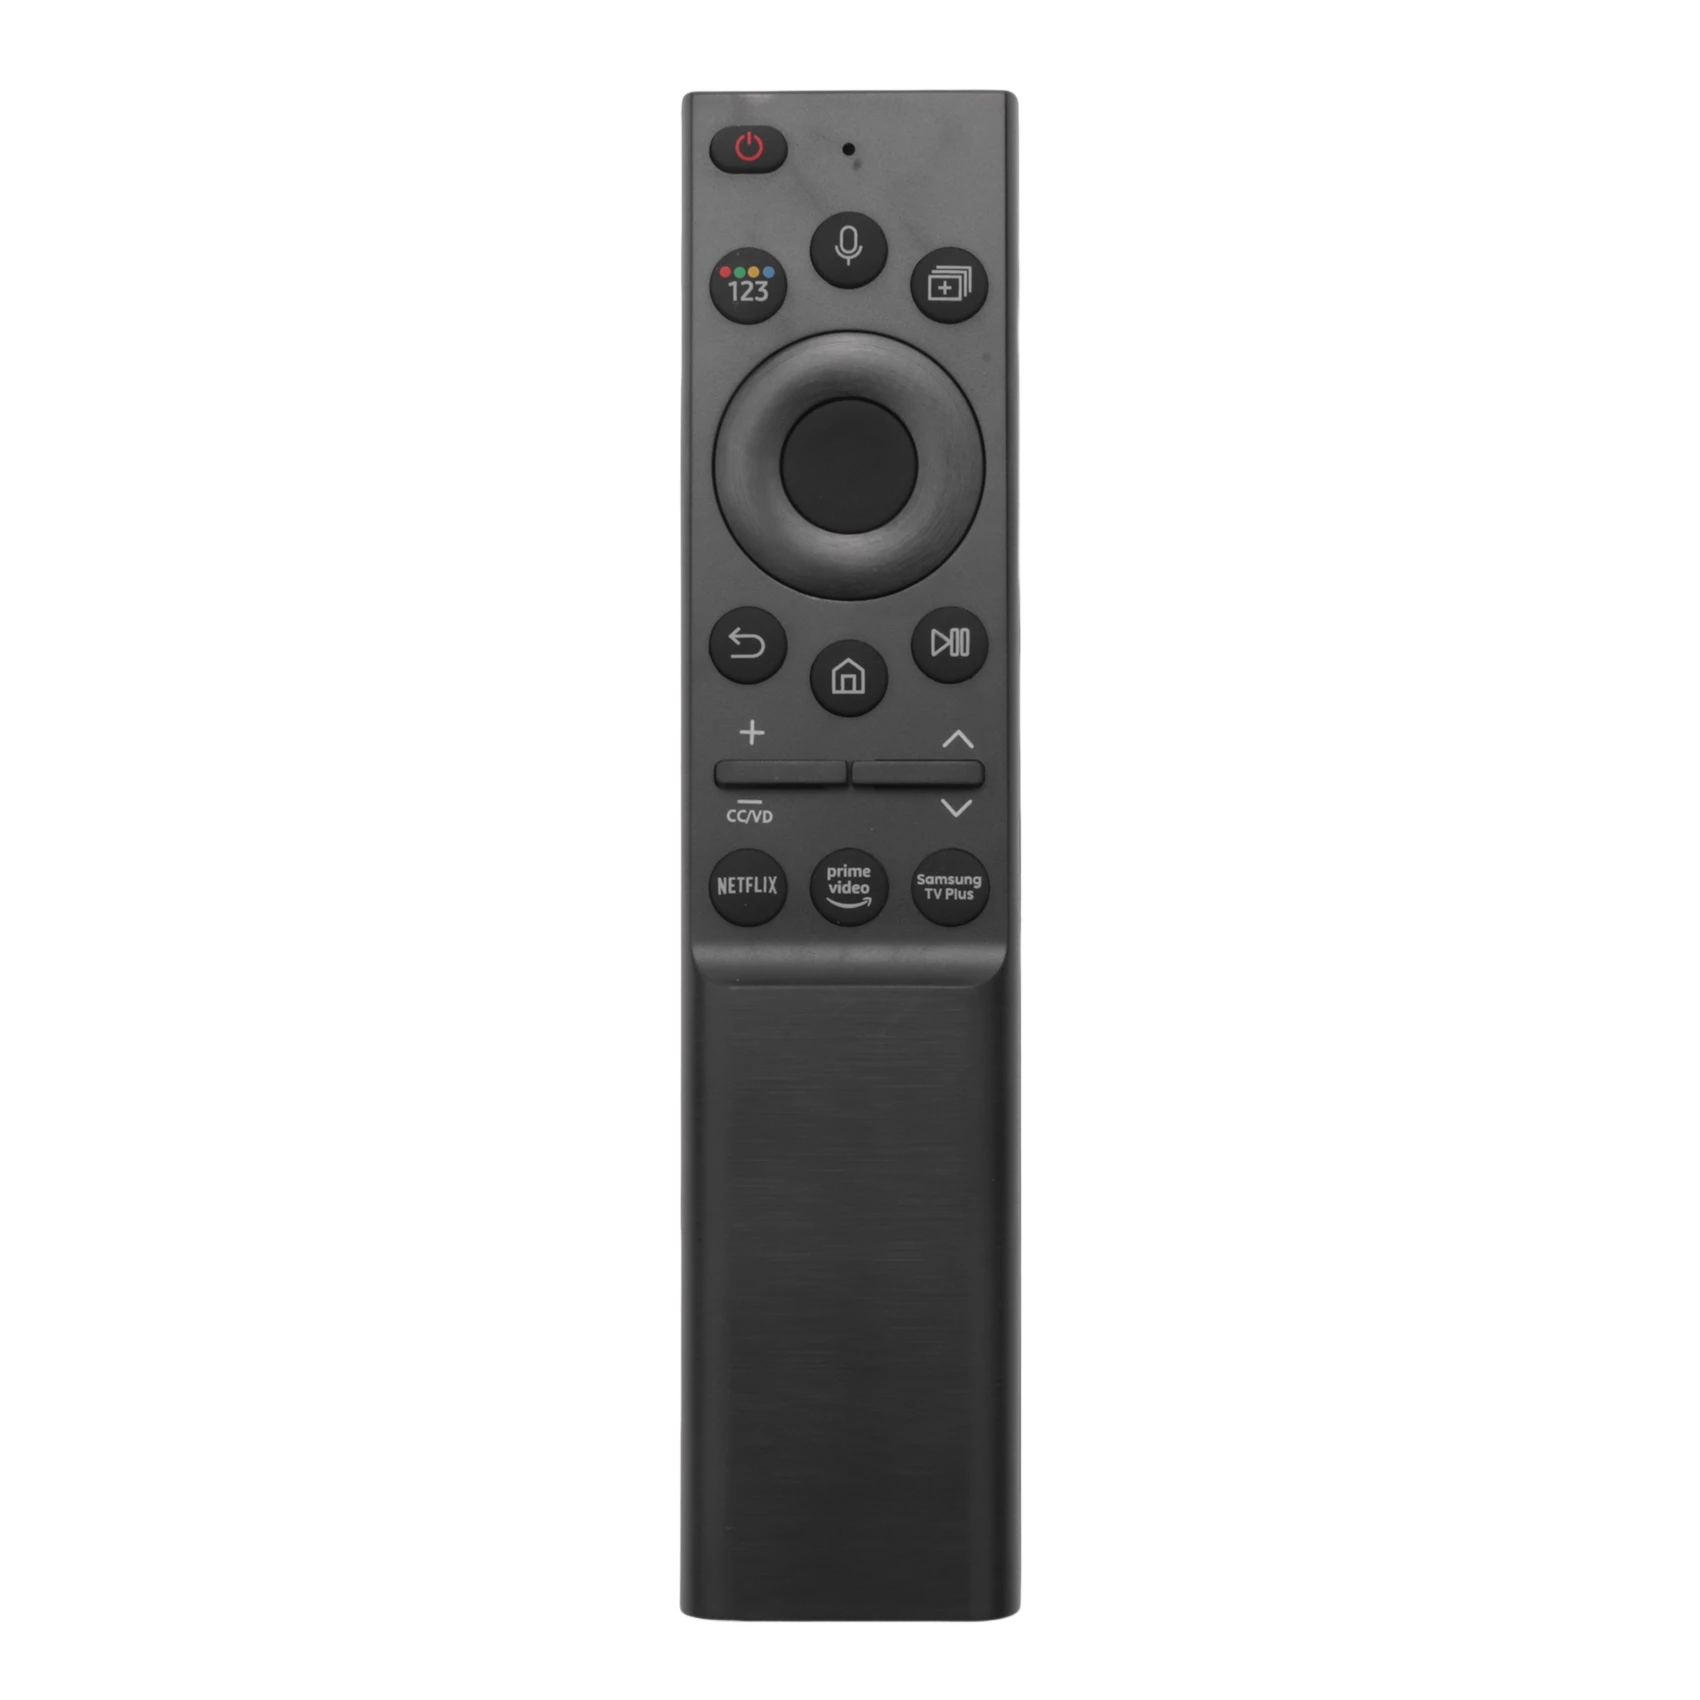 

BN59-01357F TM2180E RMCSPA1RP1 Remote Control for Smart TV Compatible with Neo QLED, the Frame and Crystal UHD